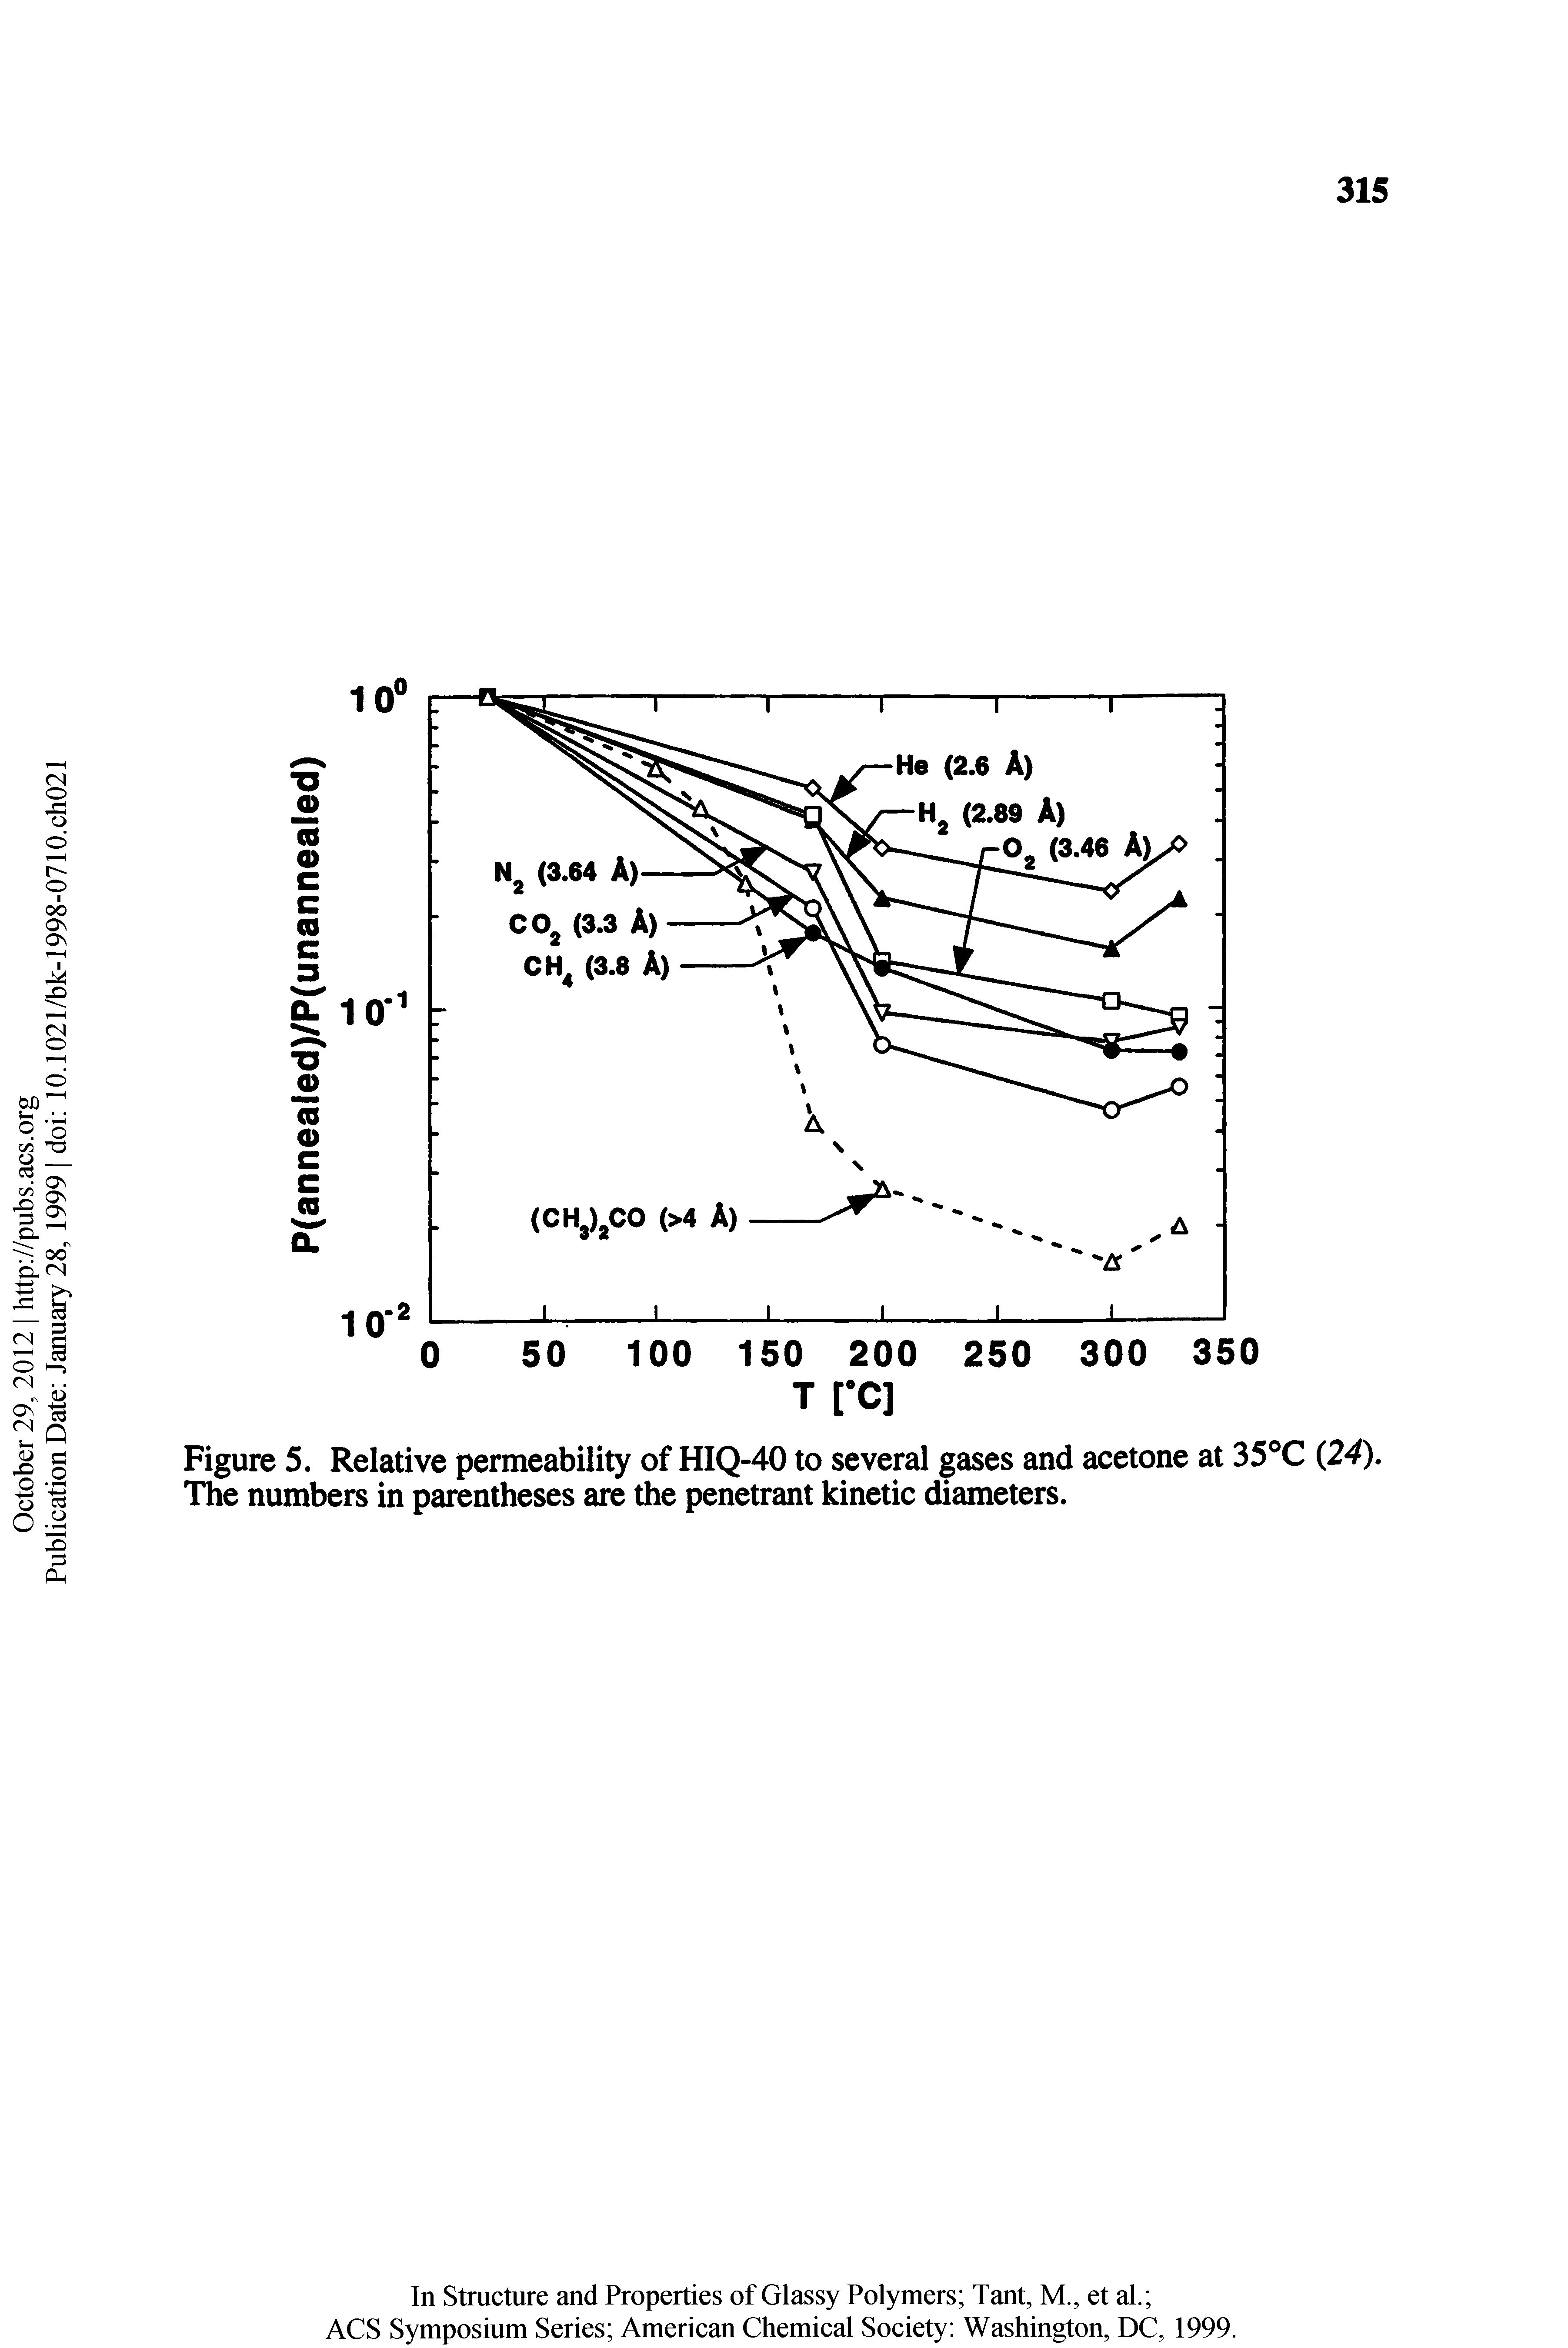 Figure 5. Relative permeability of HIQ-40 to several gases and acetone at 35 C (24), The numbers in parentheses are the penetrant kinetic diameters.